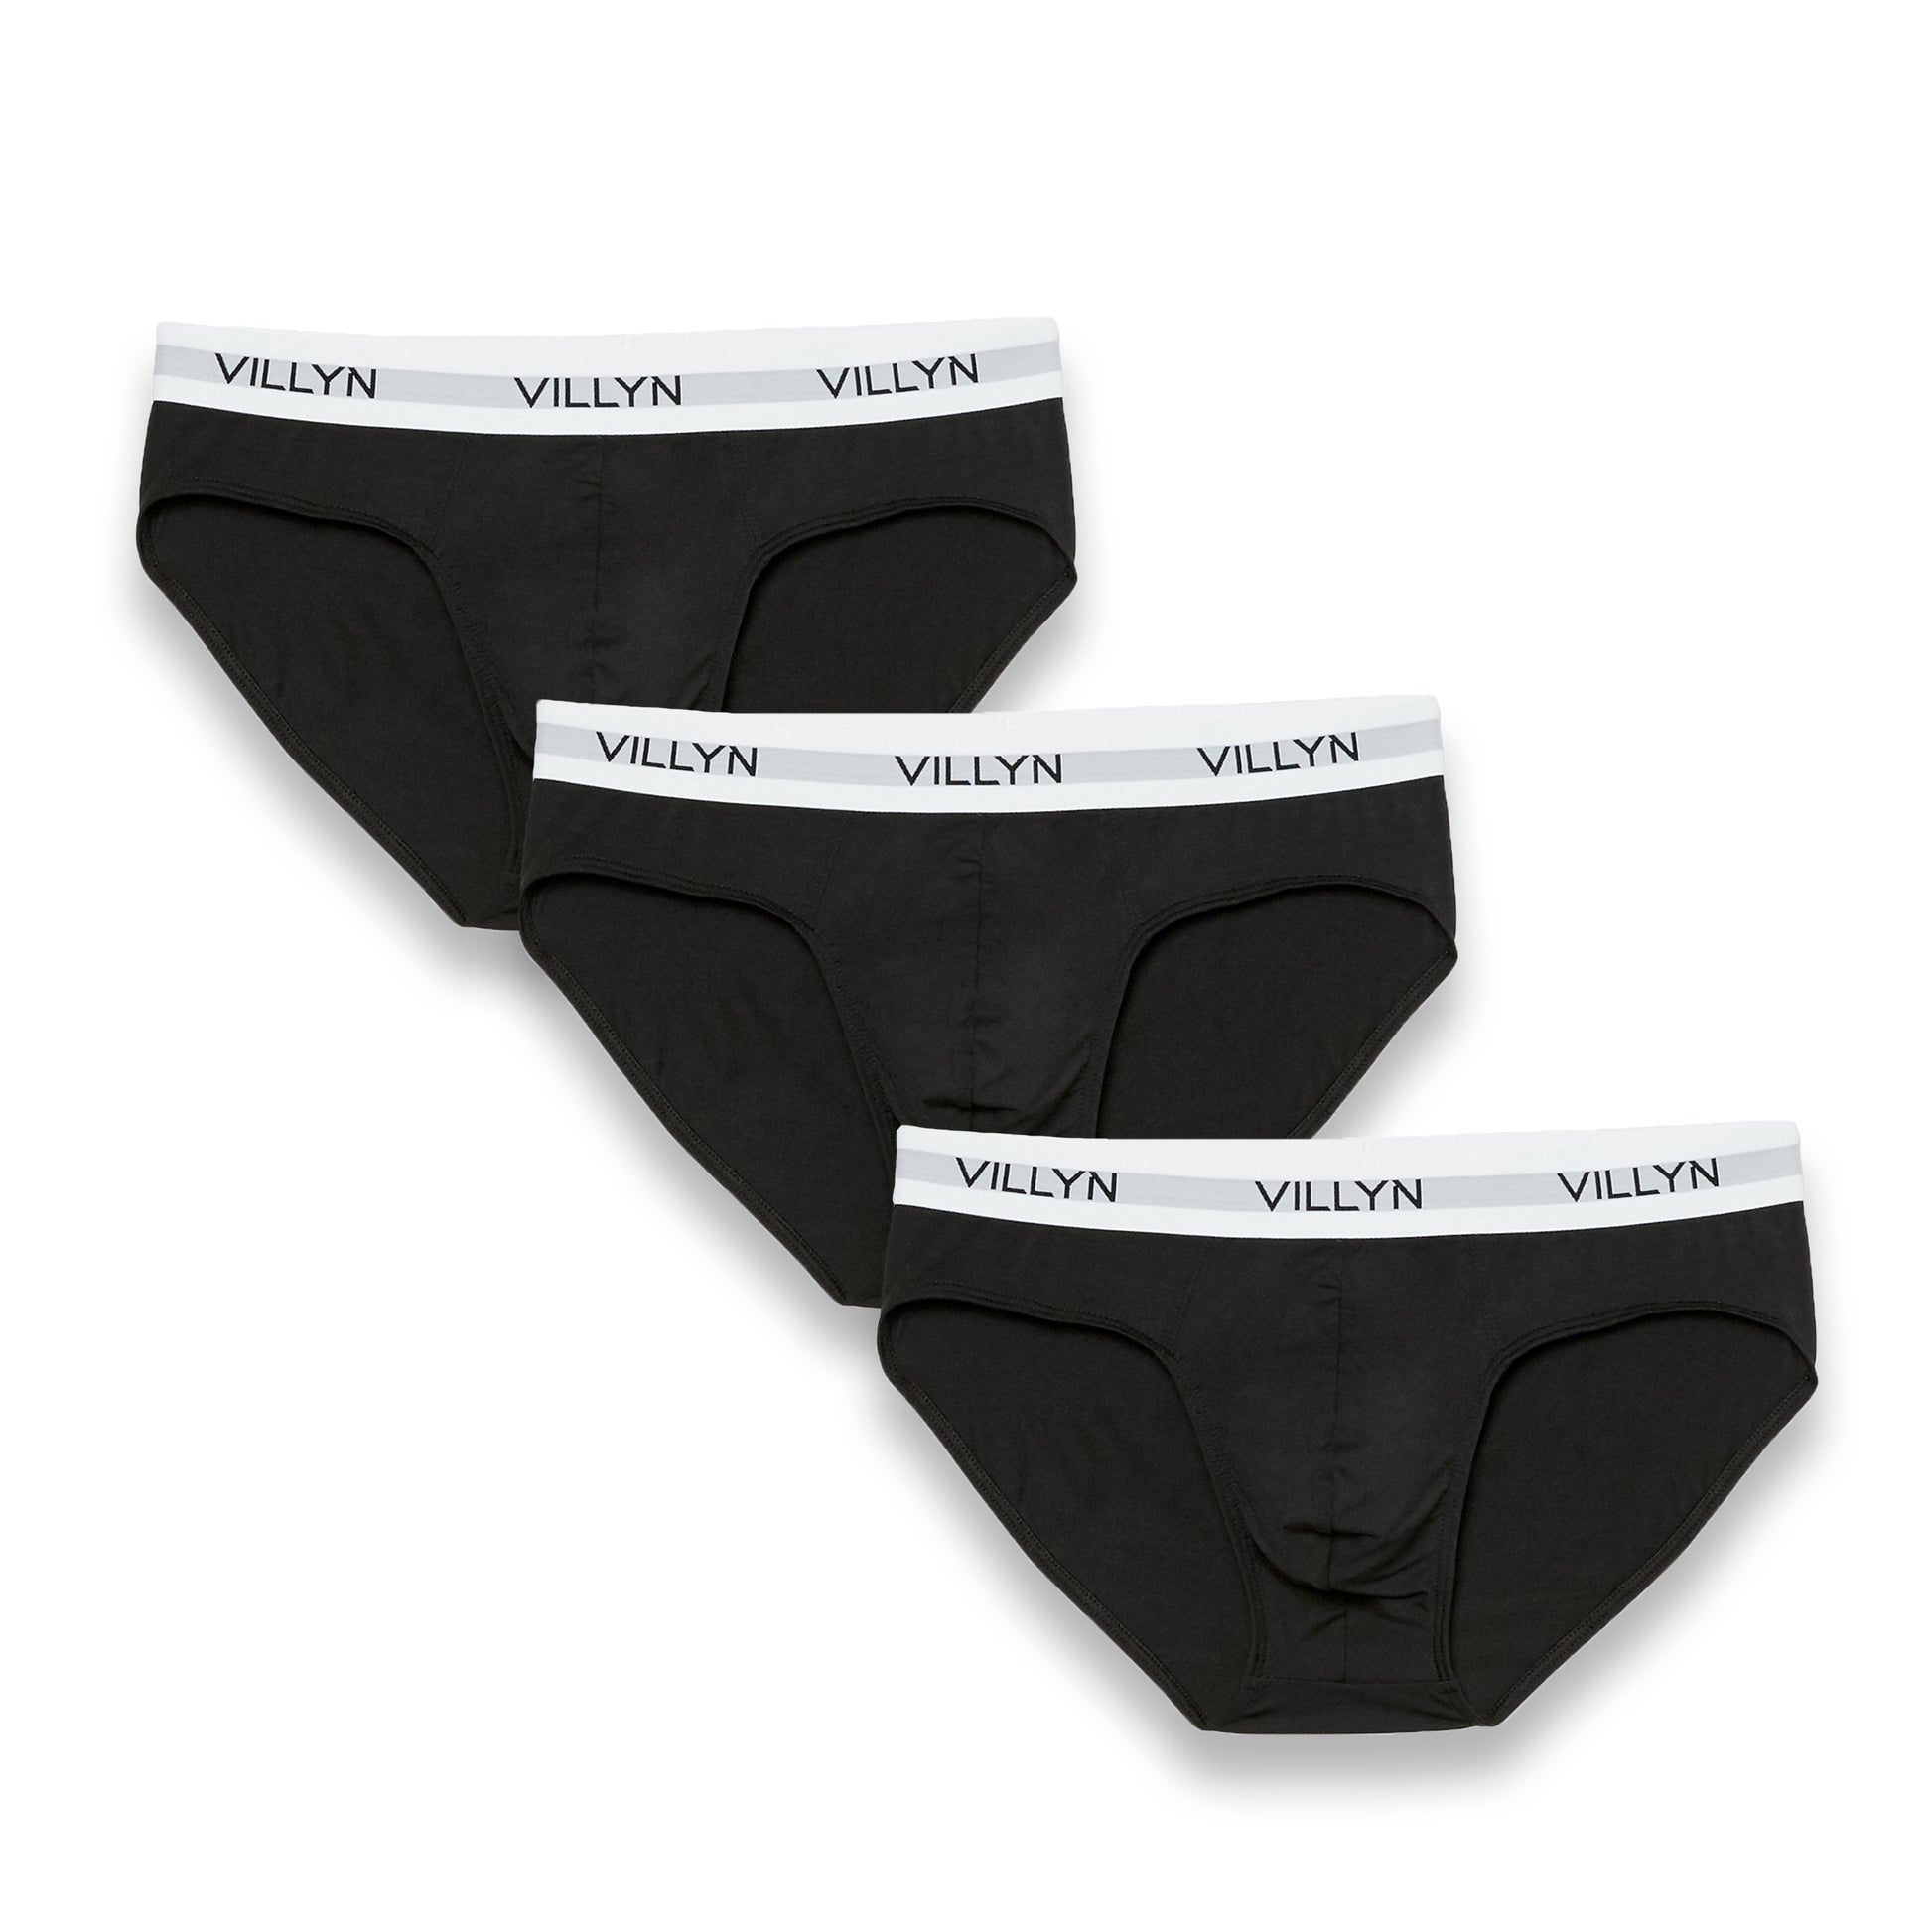 Wholesale VILLYN Origin Boxer-Brief Black Modal by VILLYN for your